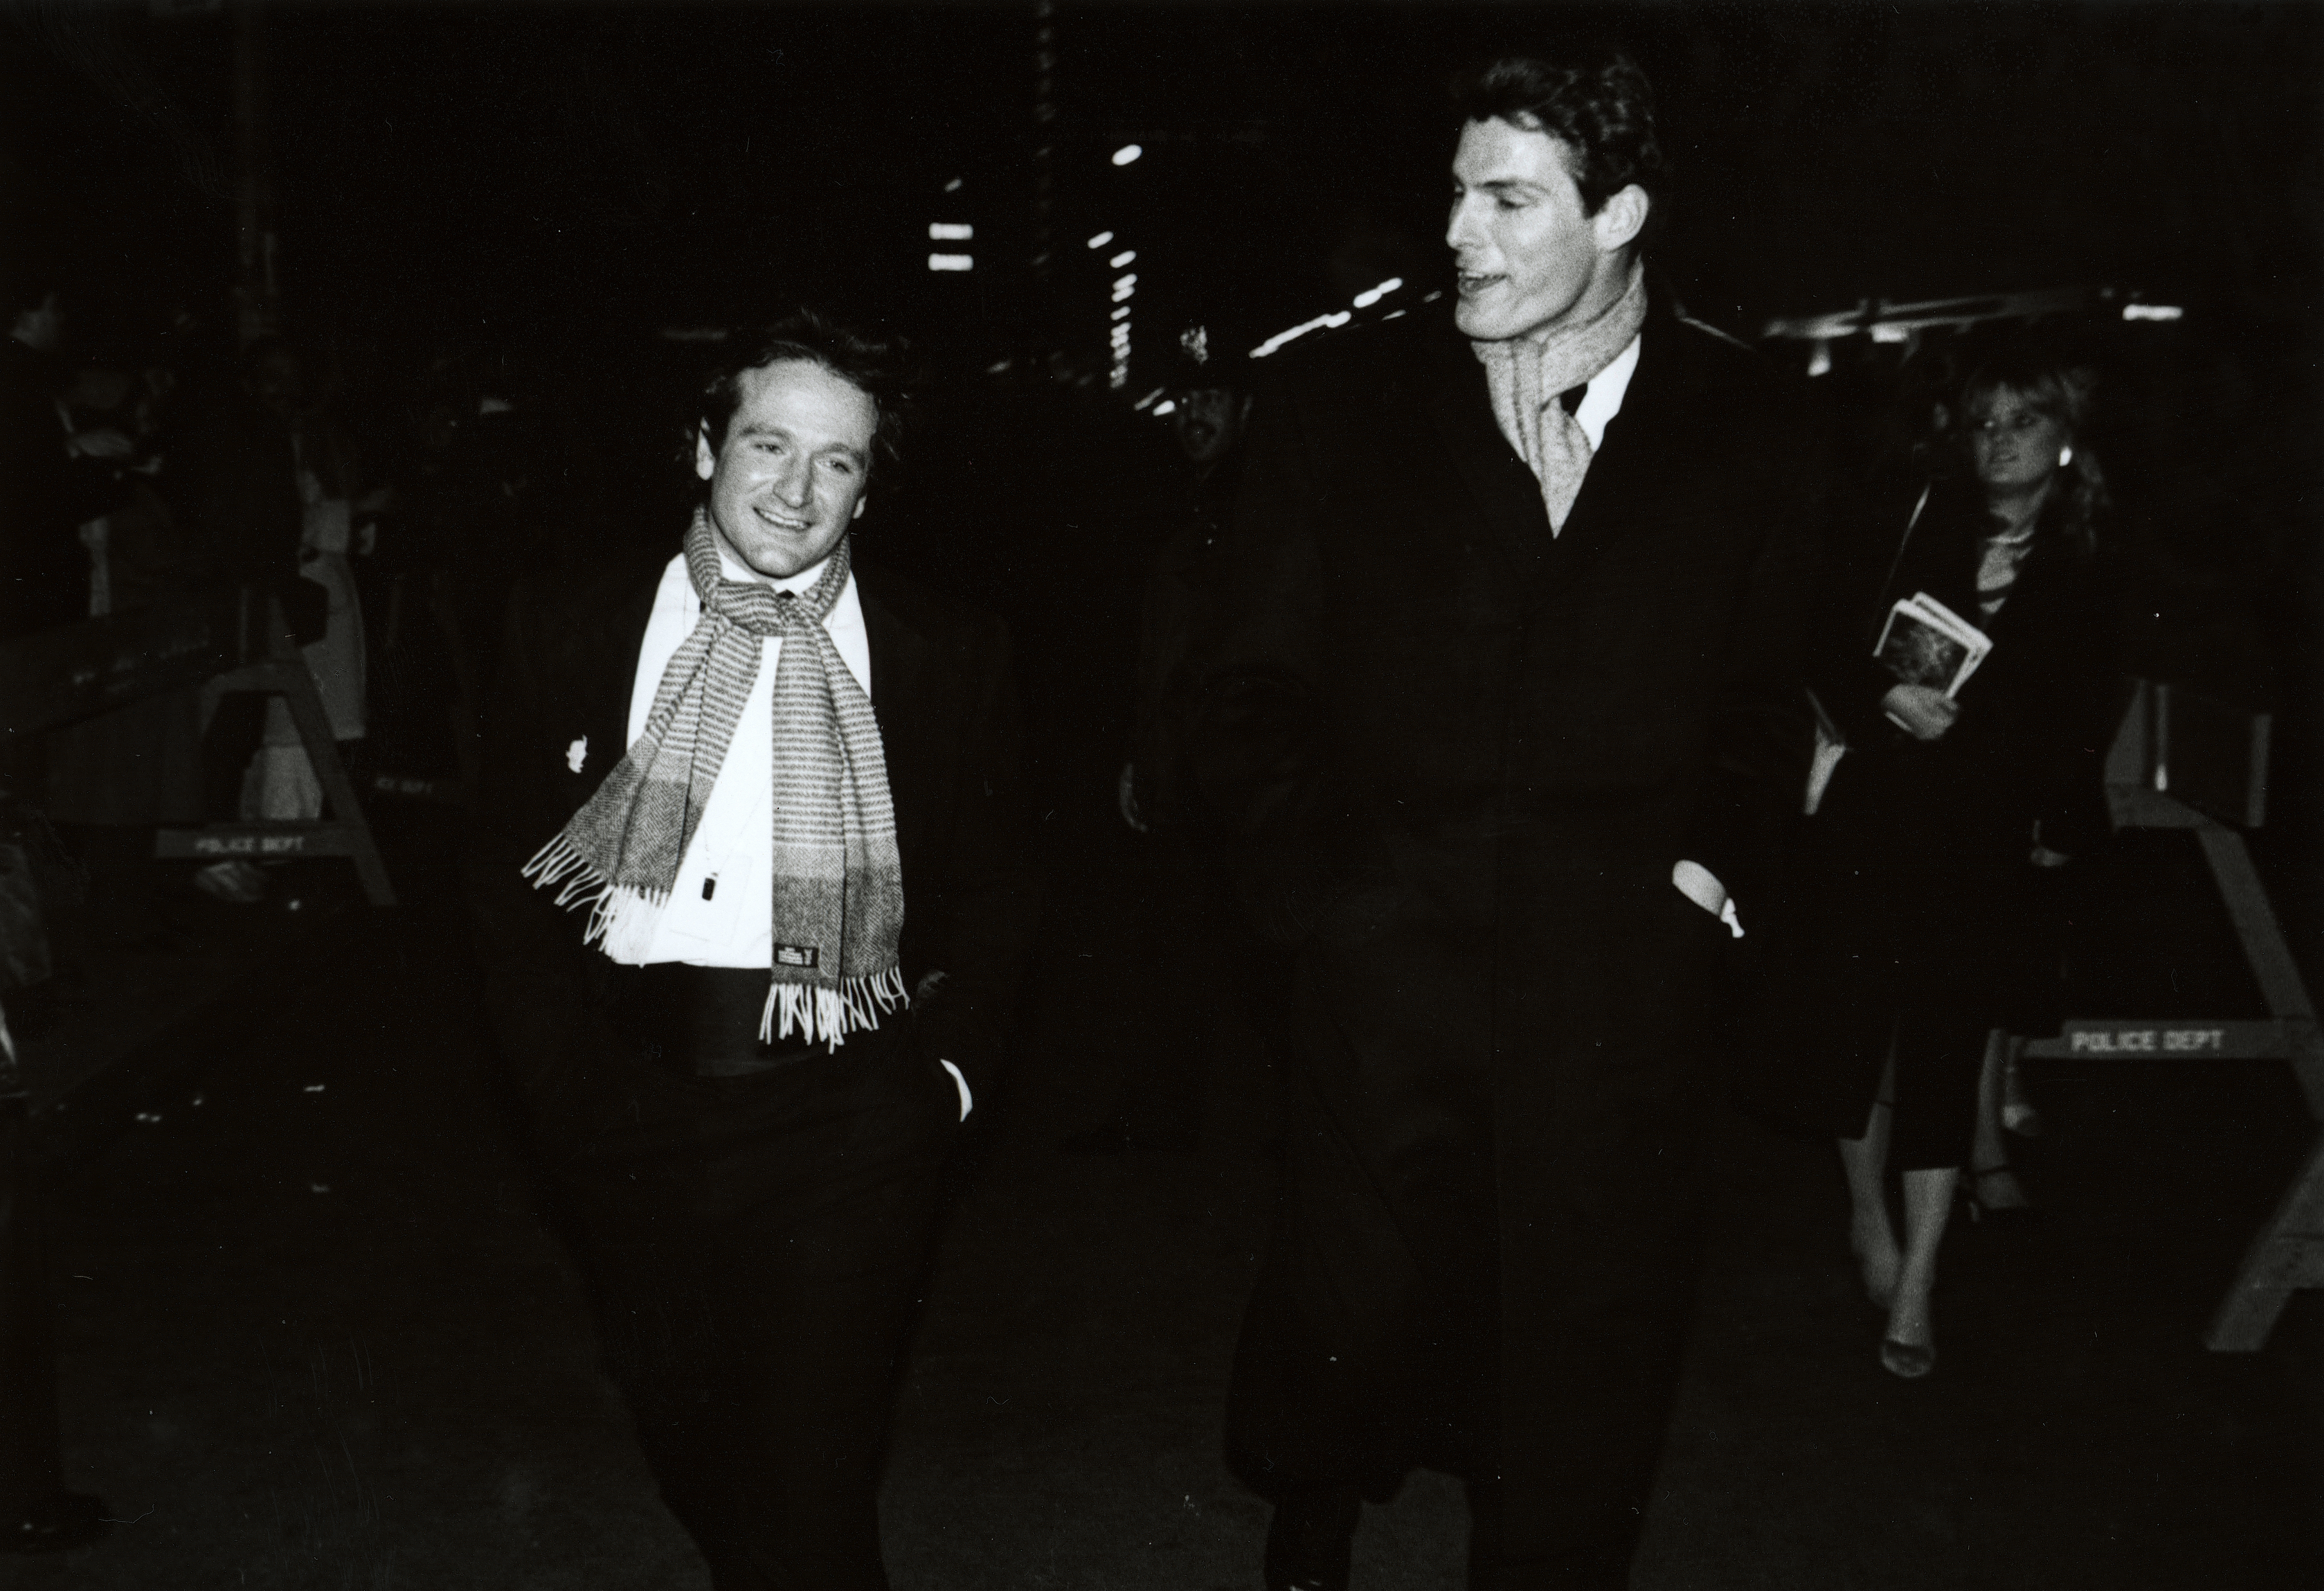 Robin Williams and Christopher Reeve at a Broadway Show in New York City in 1982. | Source: Getty Images